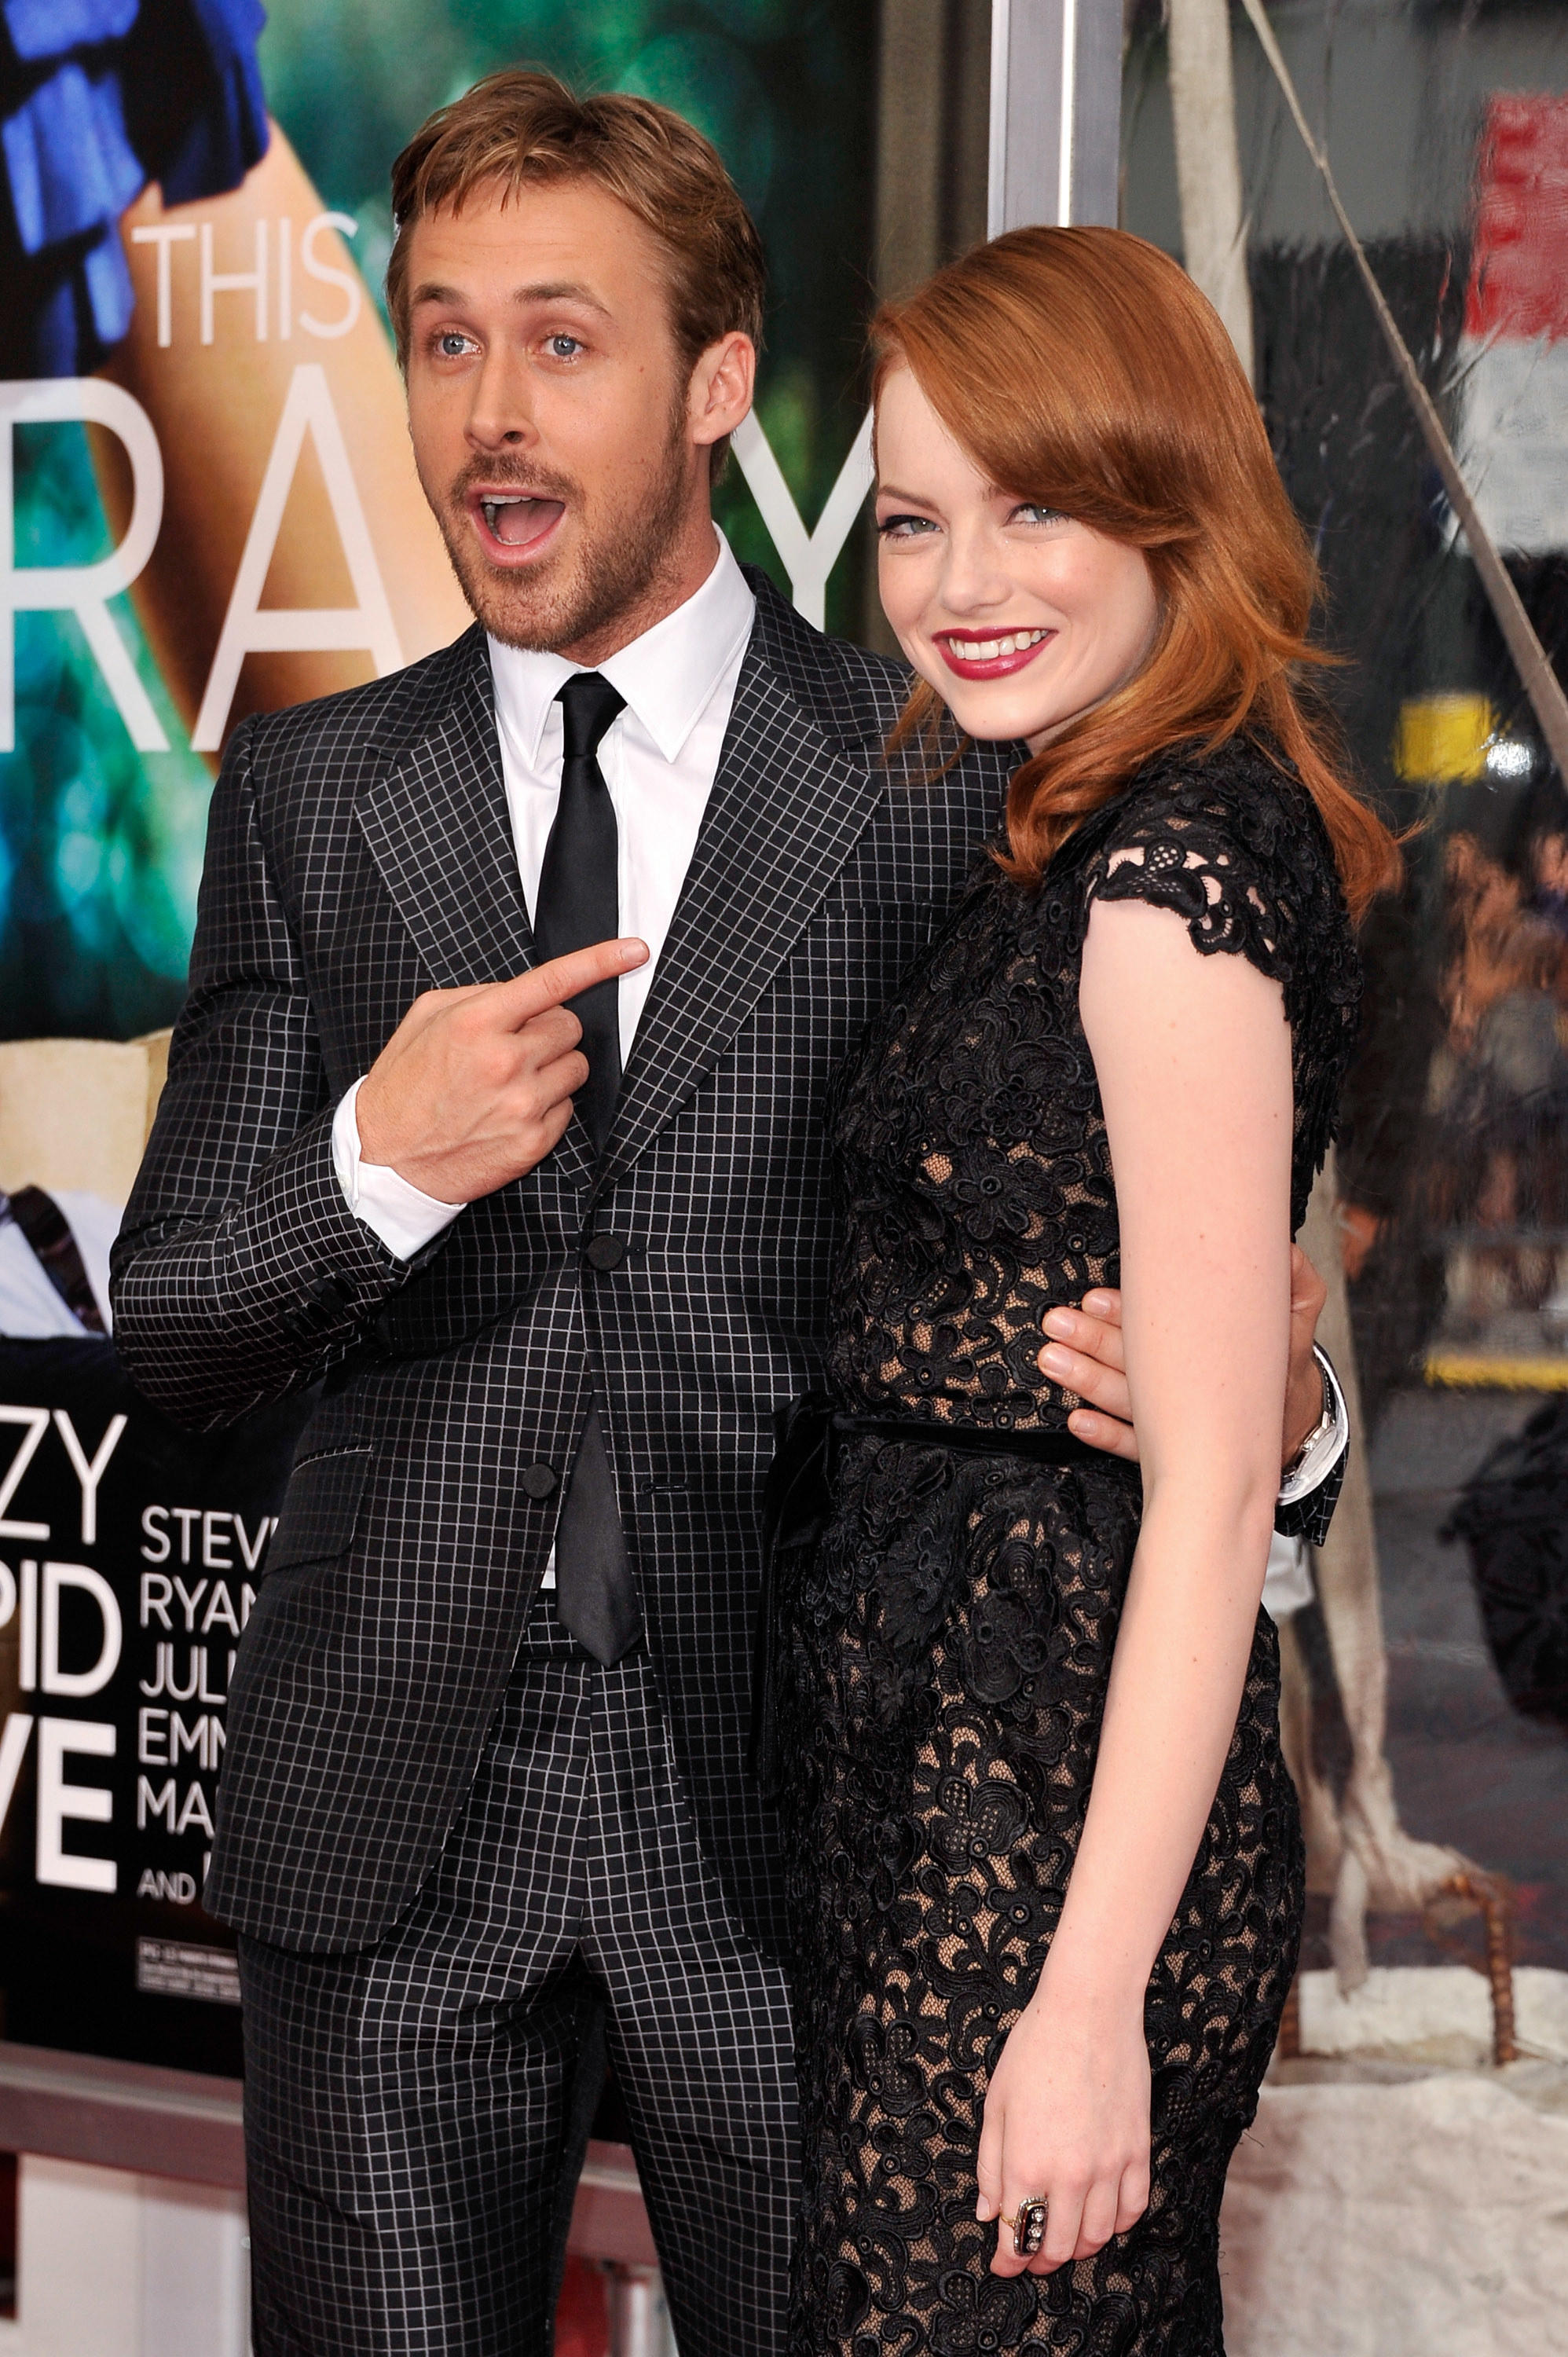 Ryan Gosling and Emma Stone on the red carpet